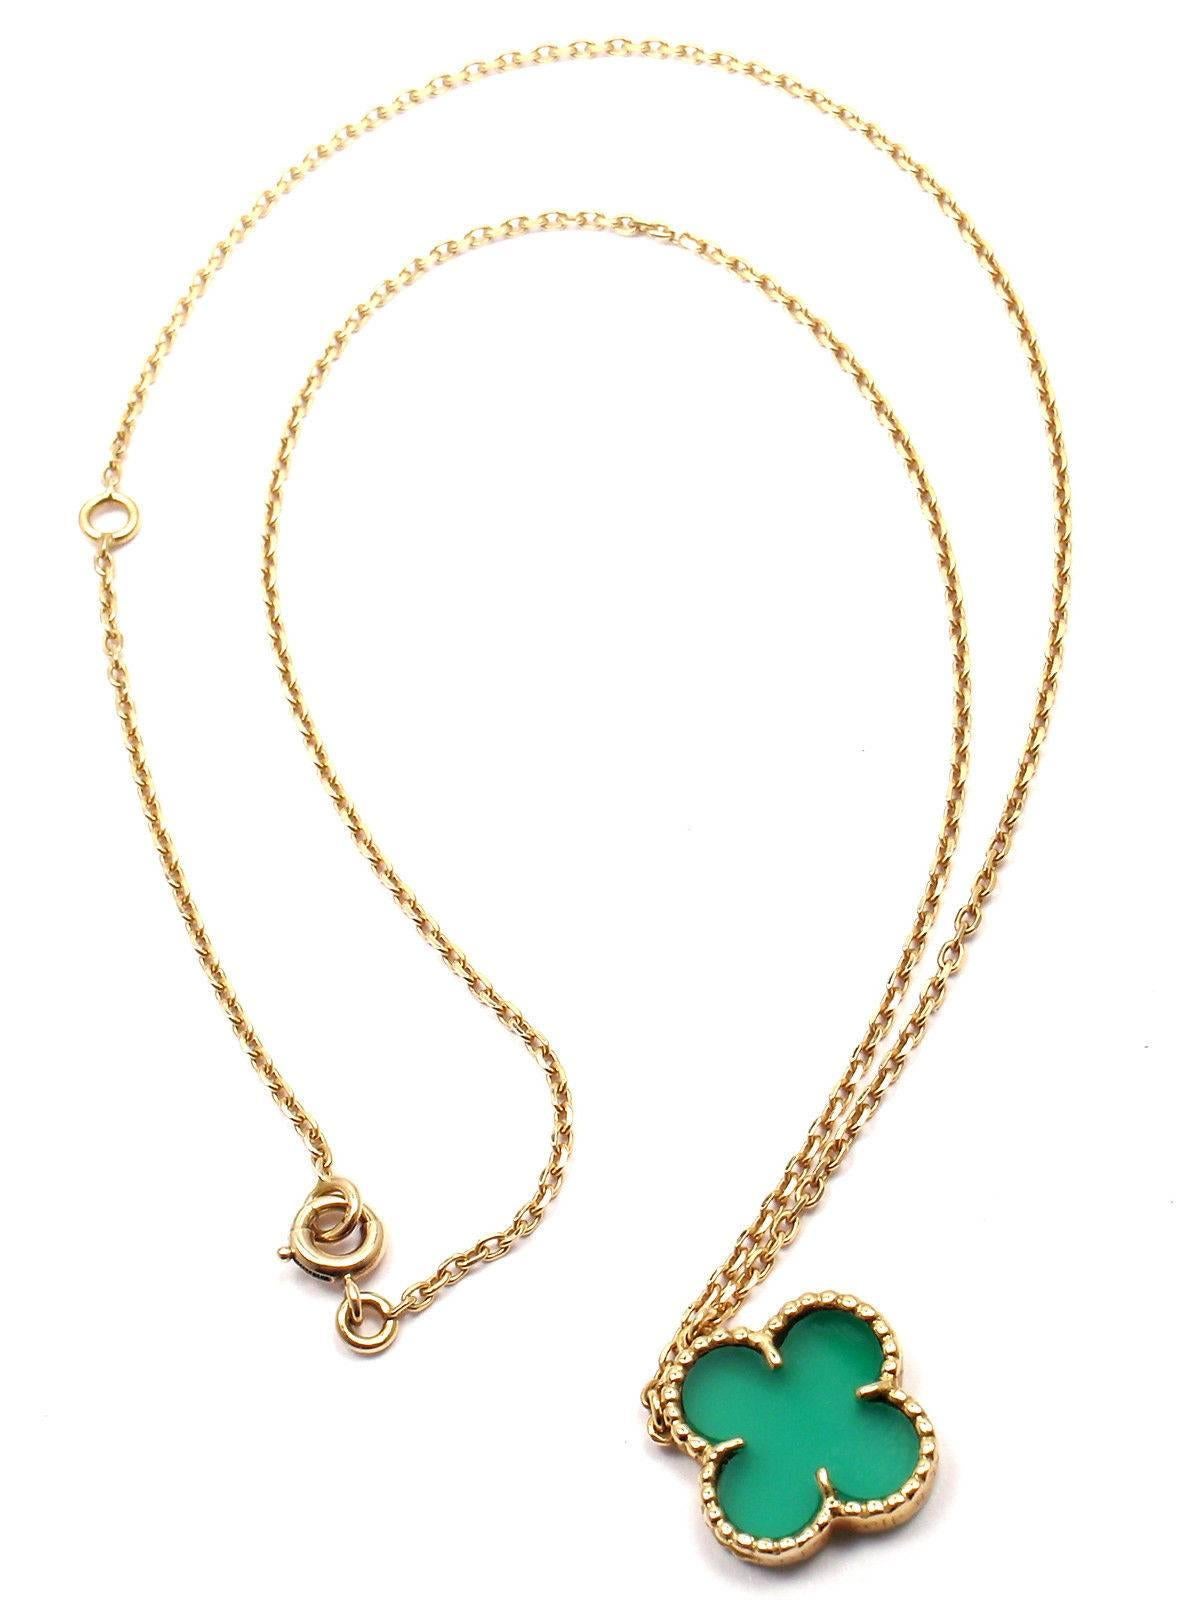 18k Yellow Gold Vintage Alhambra Green Chalcedony Pendant Necklace by Van Cleef & Arpels.
With 1 alhambra shape green chalcedony 15mm.

Details:
Length: 17